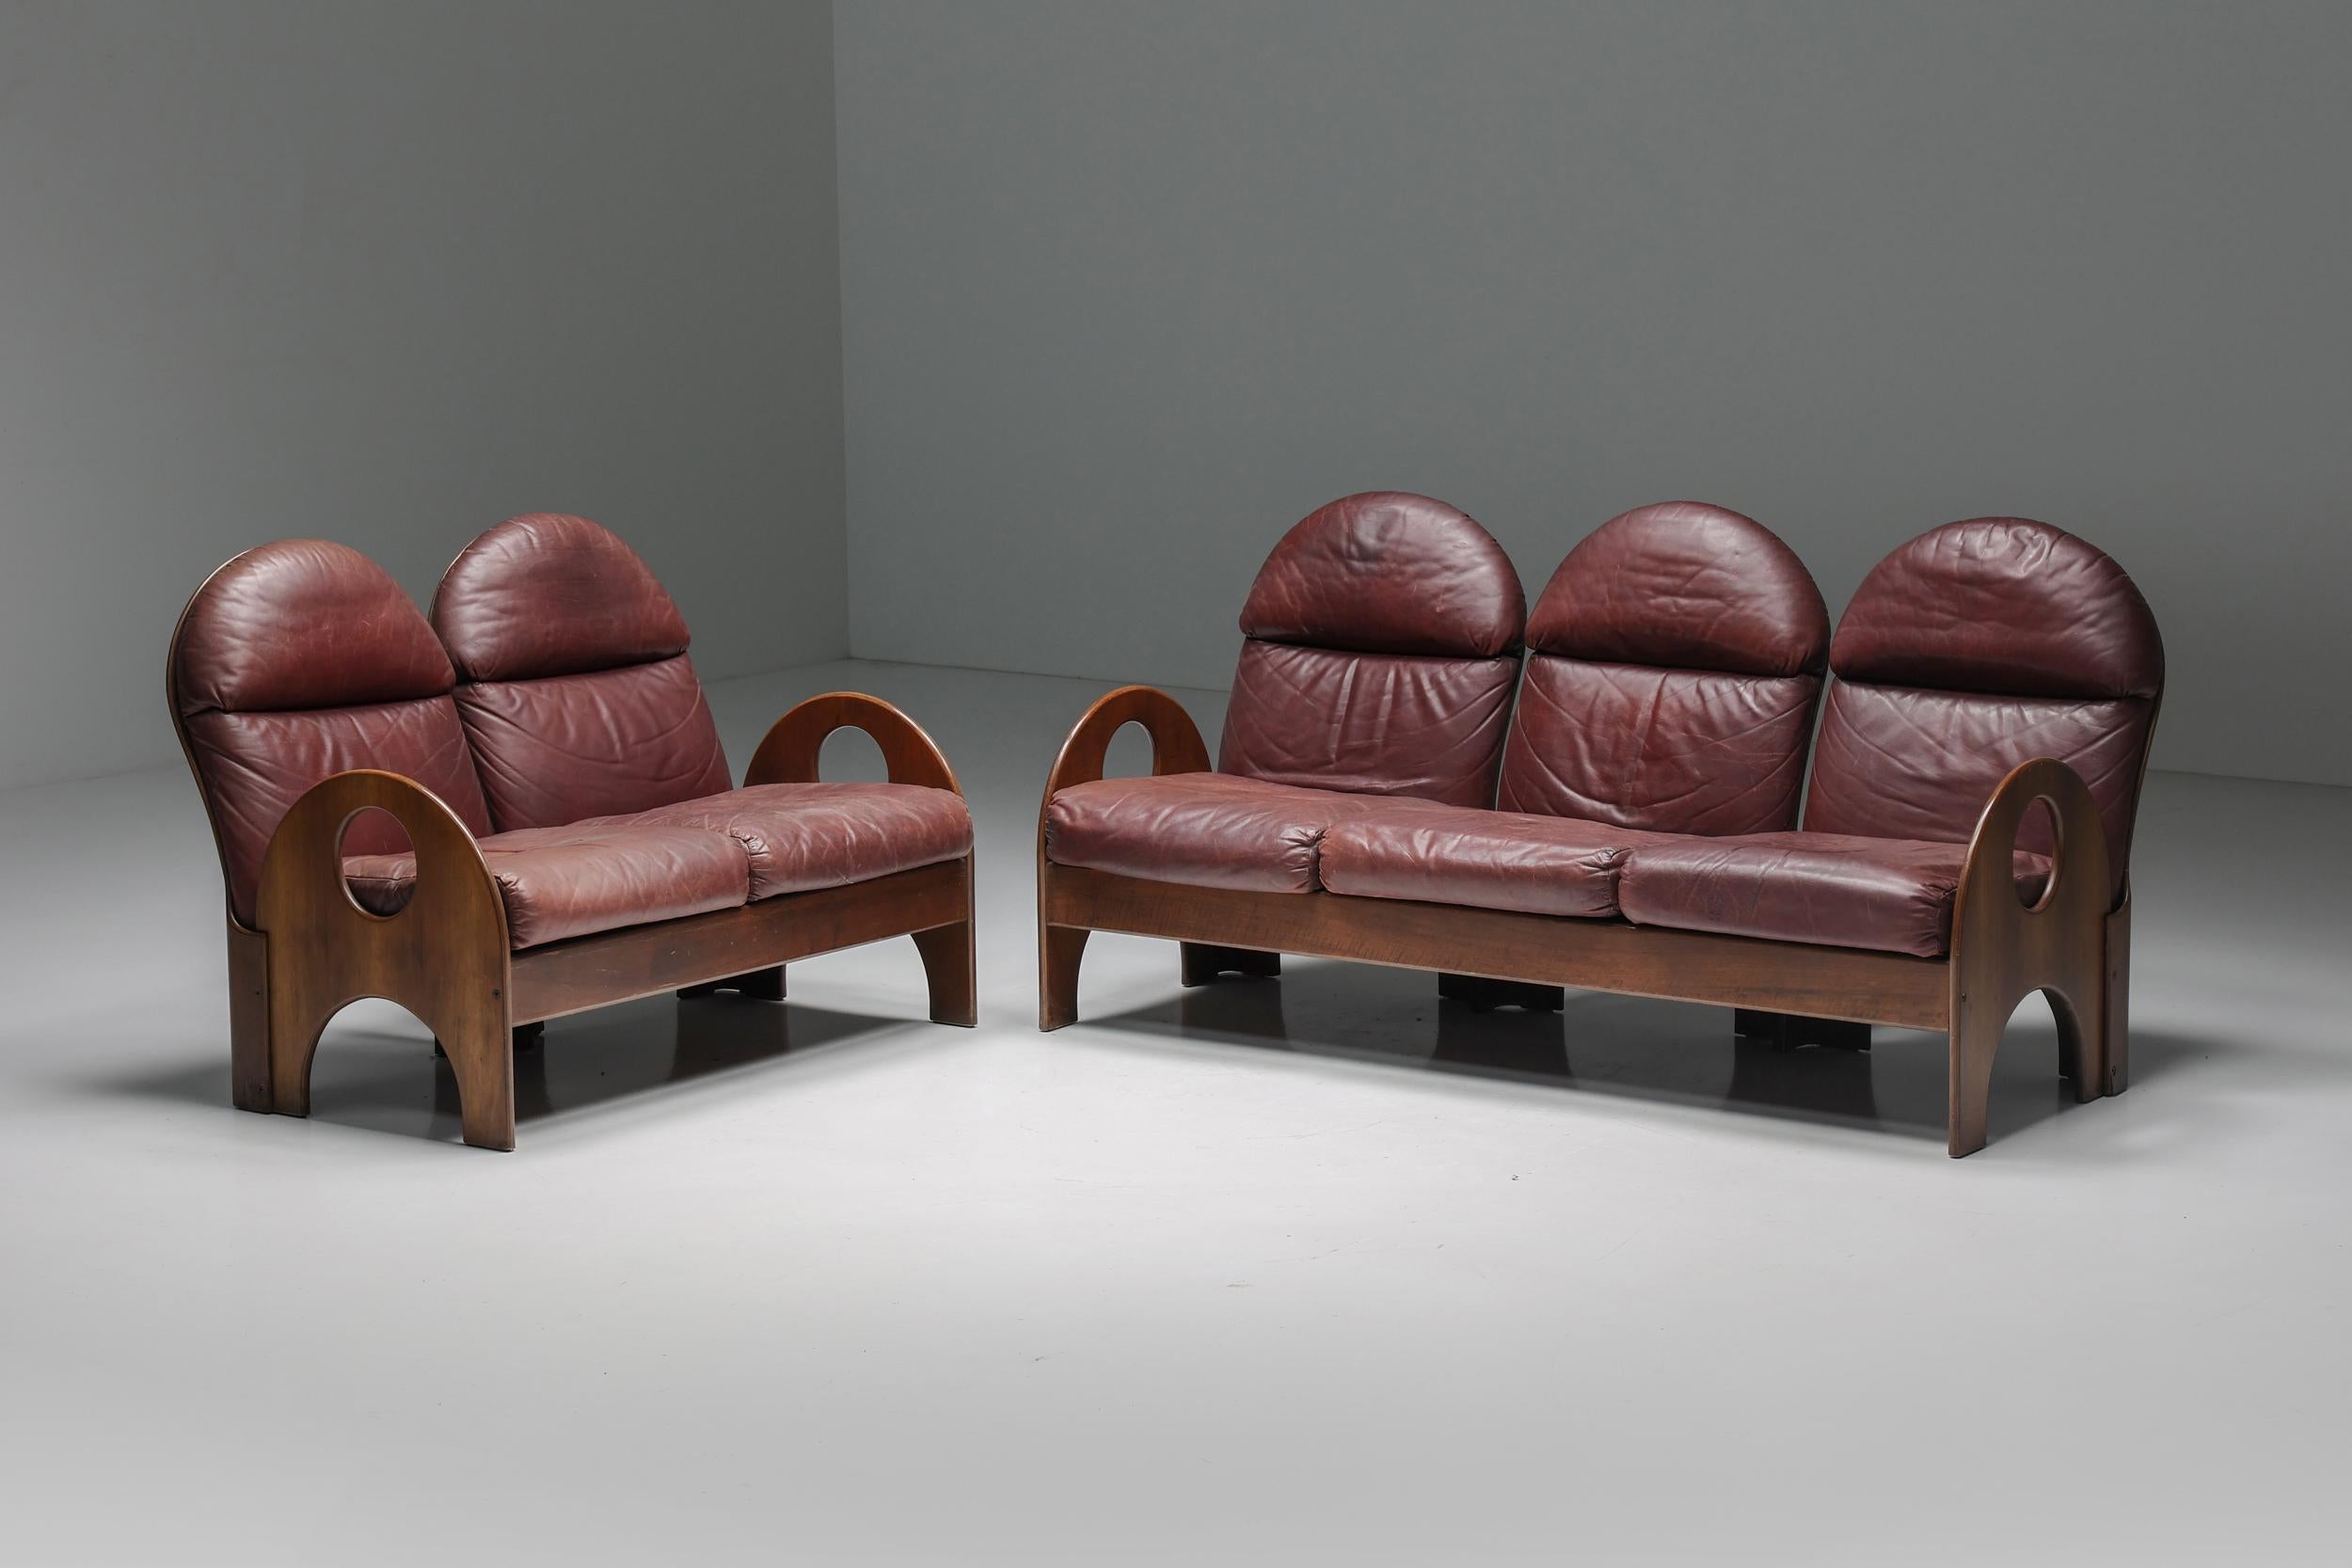 Pair of 'Arcata' Easy Chairs by Gae Aulenti, Walnut and Burgundy Leather, 1968 For Sale 6